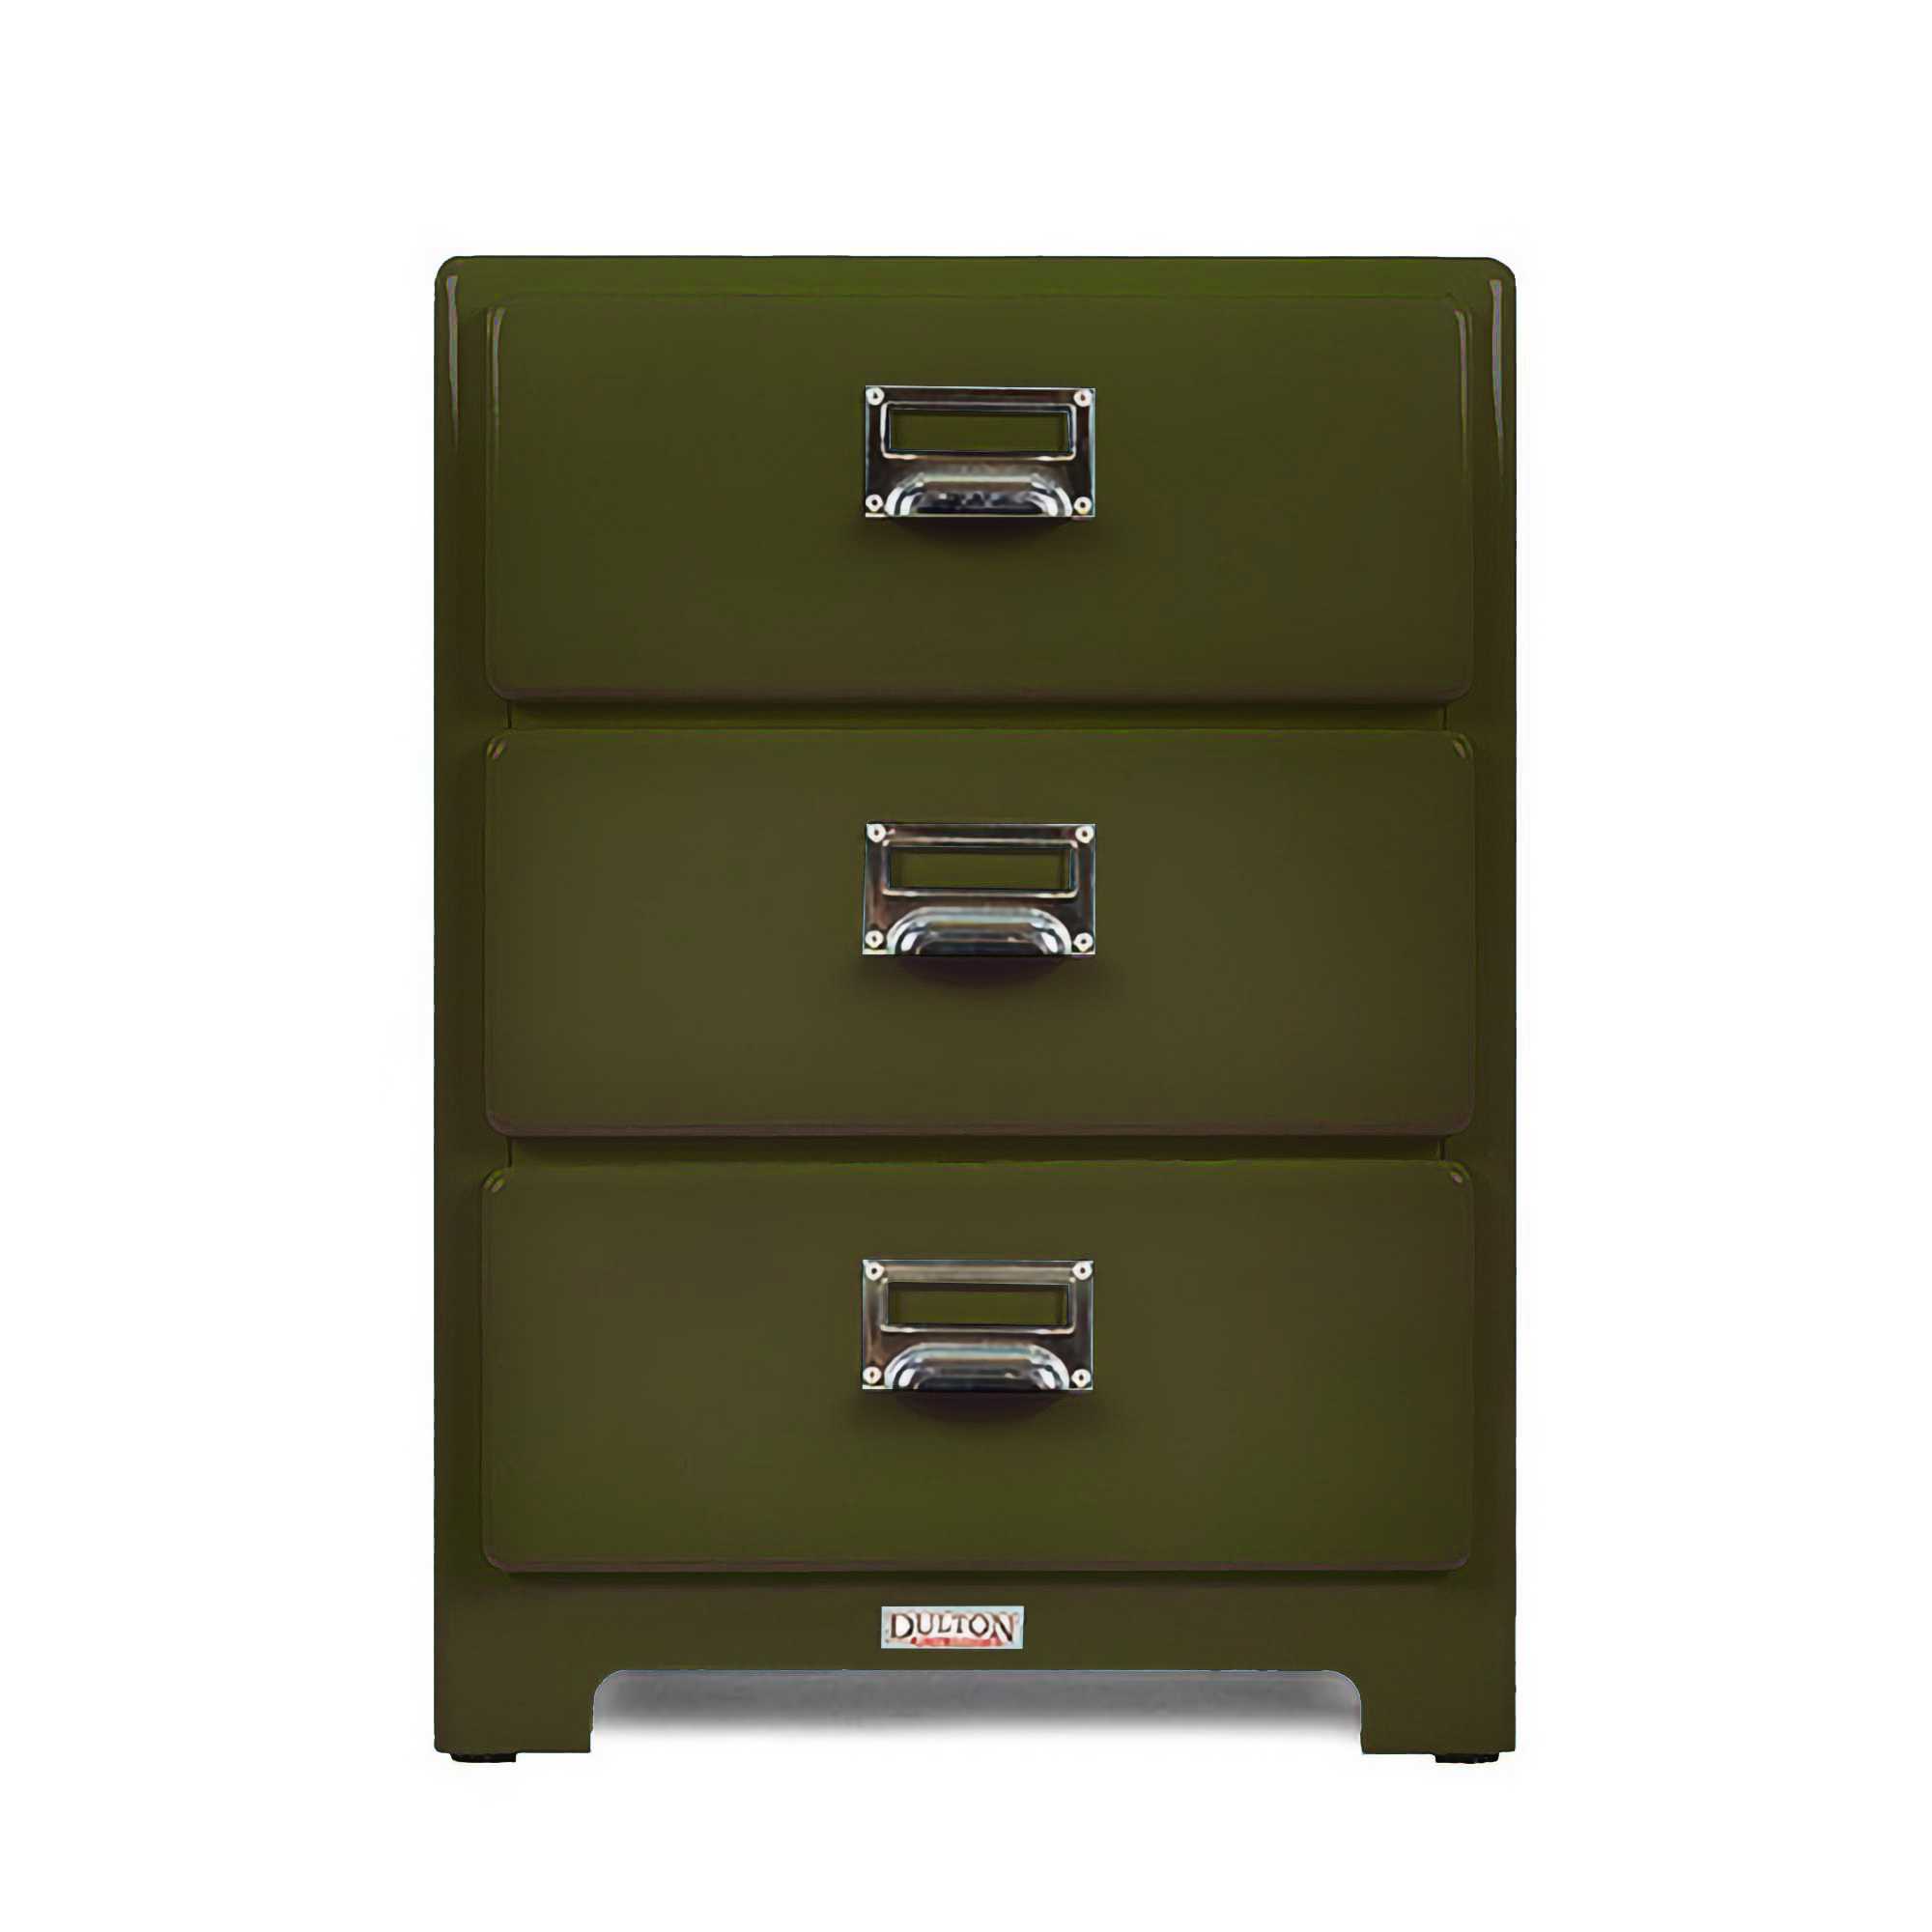 Dulton 3 Drawers Chest, Olive Drab